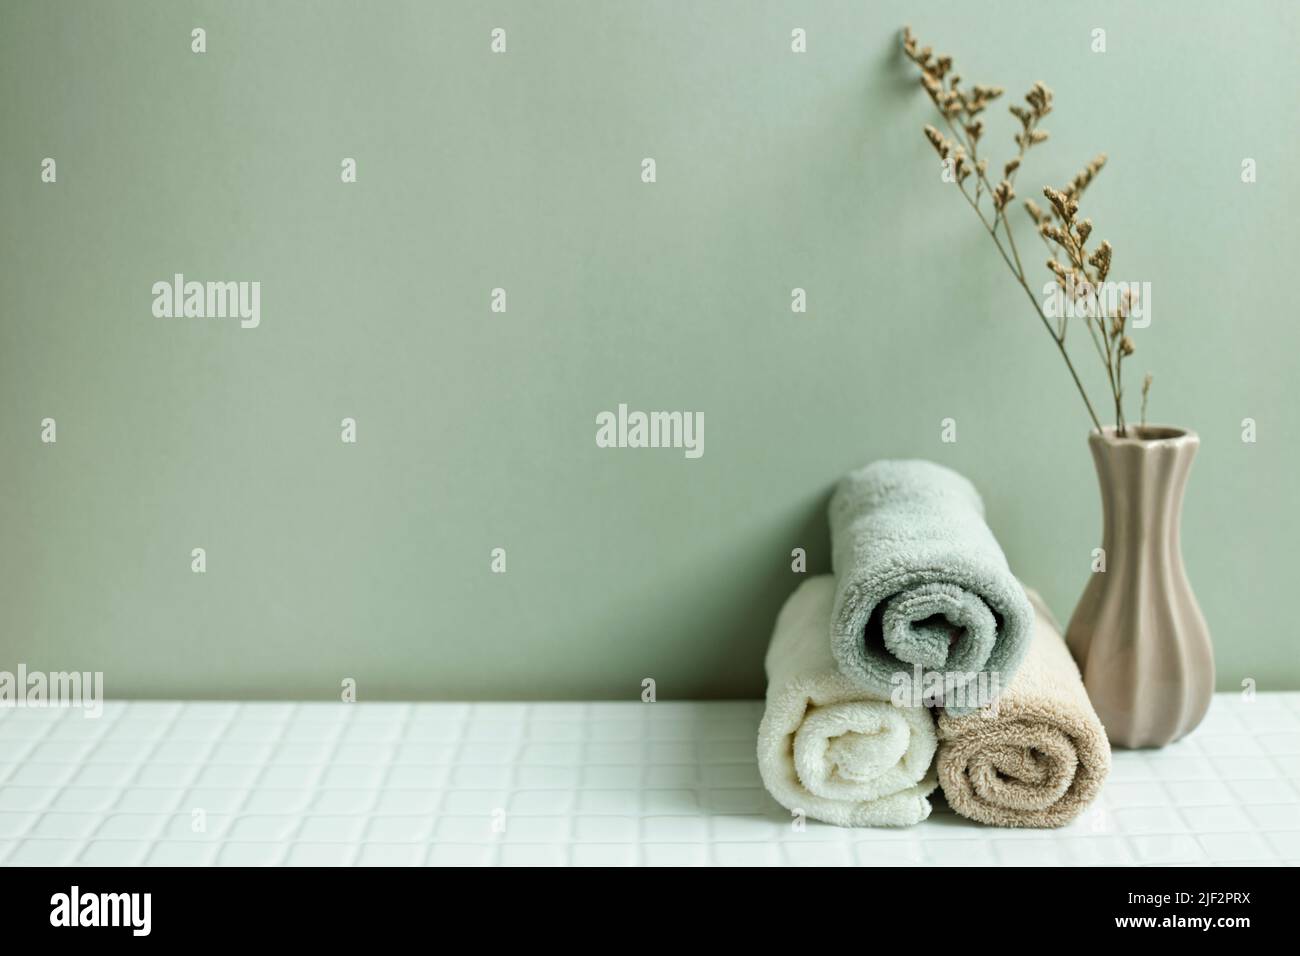 Bathroom towel and dry flower on white table. khaki green wall background. skin care and spa concept Stock Photo